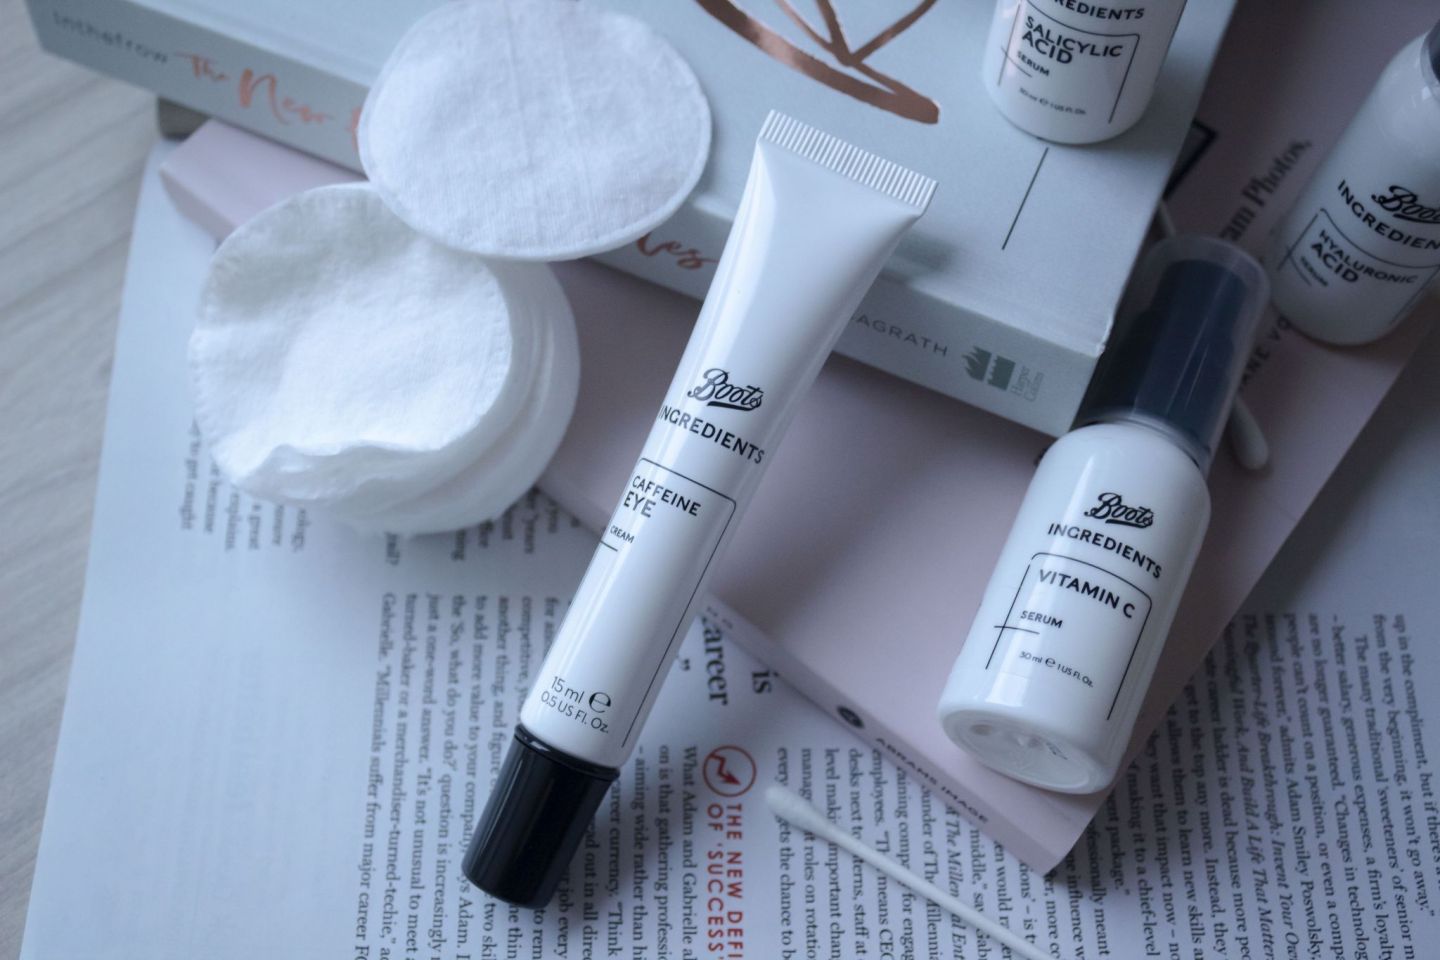 Review: Testing the New Boots Ingredients Range | BEAUTY | FREYA WILCOX